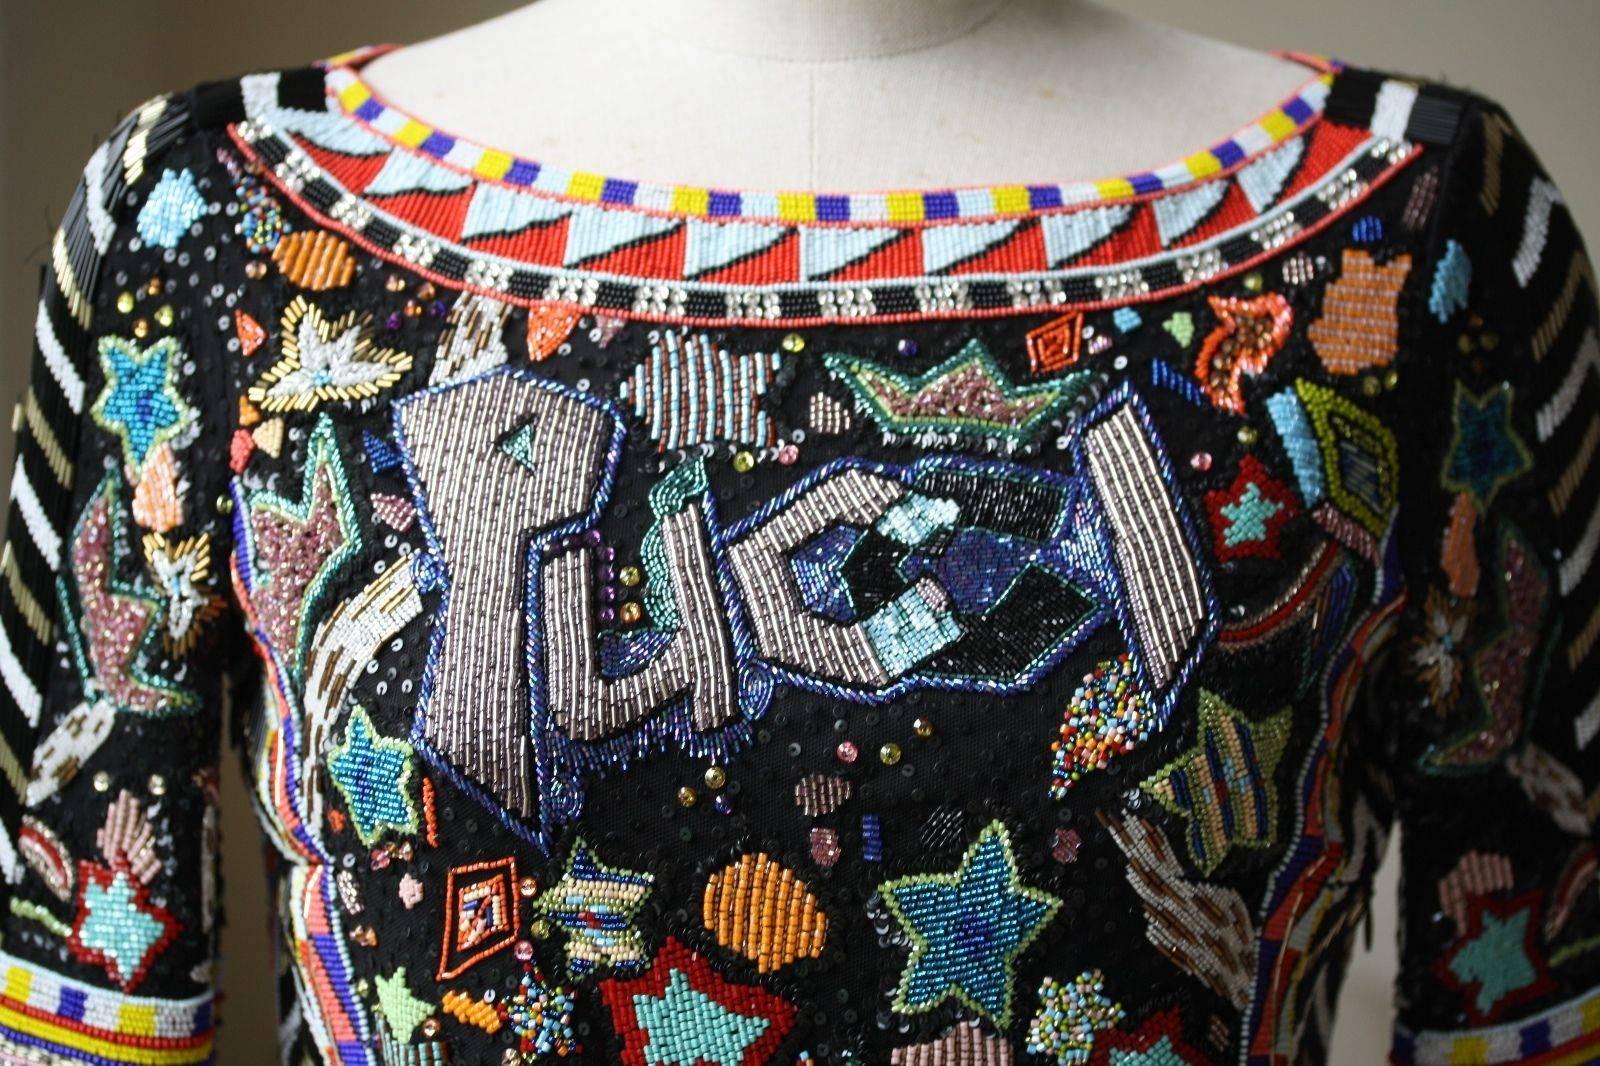 Pay homage to the exquisite look of Emilio Pucci with this bead embellished long sleeve sheath. Wide neckline, long sleeves, multicolored beading, cutout back with zip closure. Form-fitting. 

Size - IT 40 (UK 8, US 6, FR 36)

Condition: New without